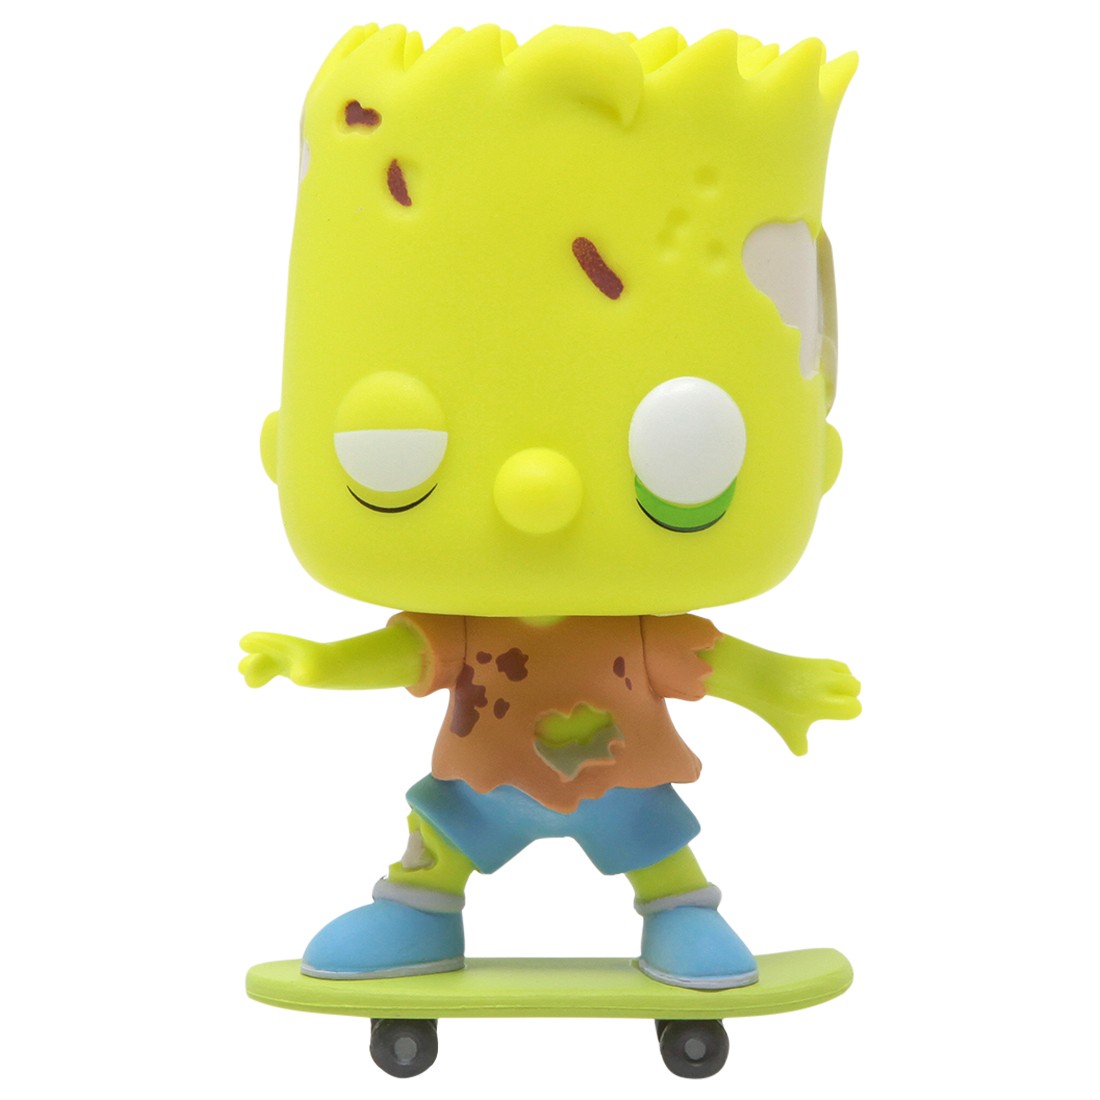 Funko POP TV The Simpsons Treehouse Of Horror - Zombie Bart (yellow)